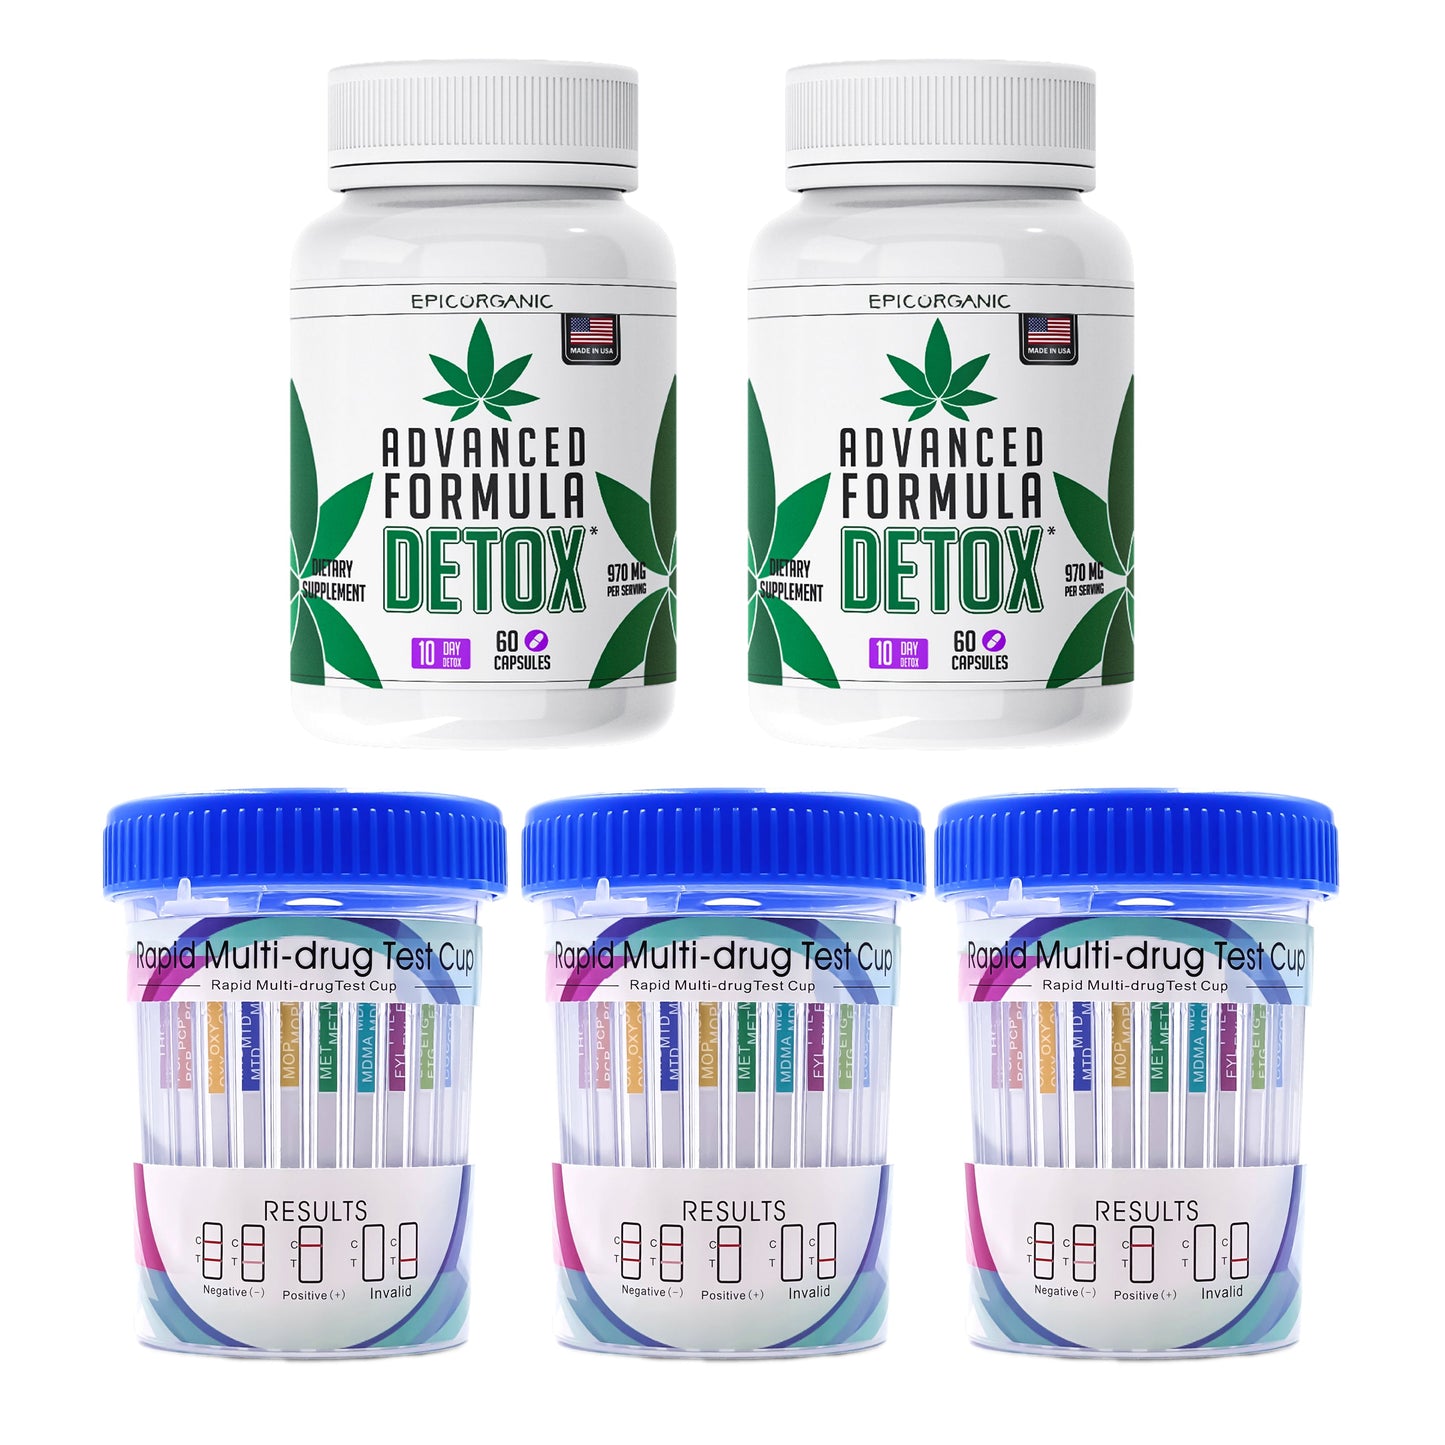 THC & DRUG PERMANENT DETOX CLEANSE FULL BODY WEED CLEANSE (2x Pack) & MULTI DRUG TEST (3 Pack) Epic Organic